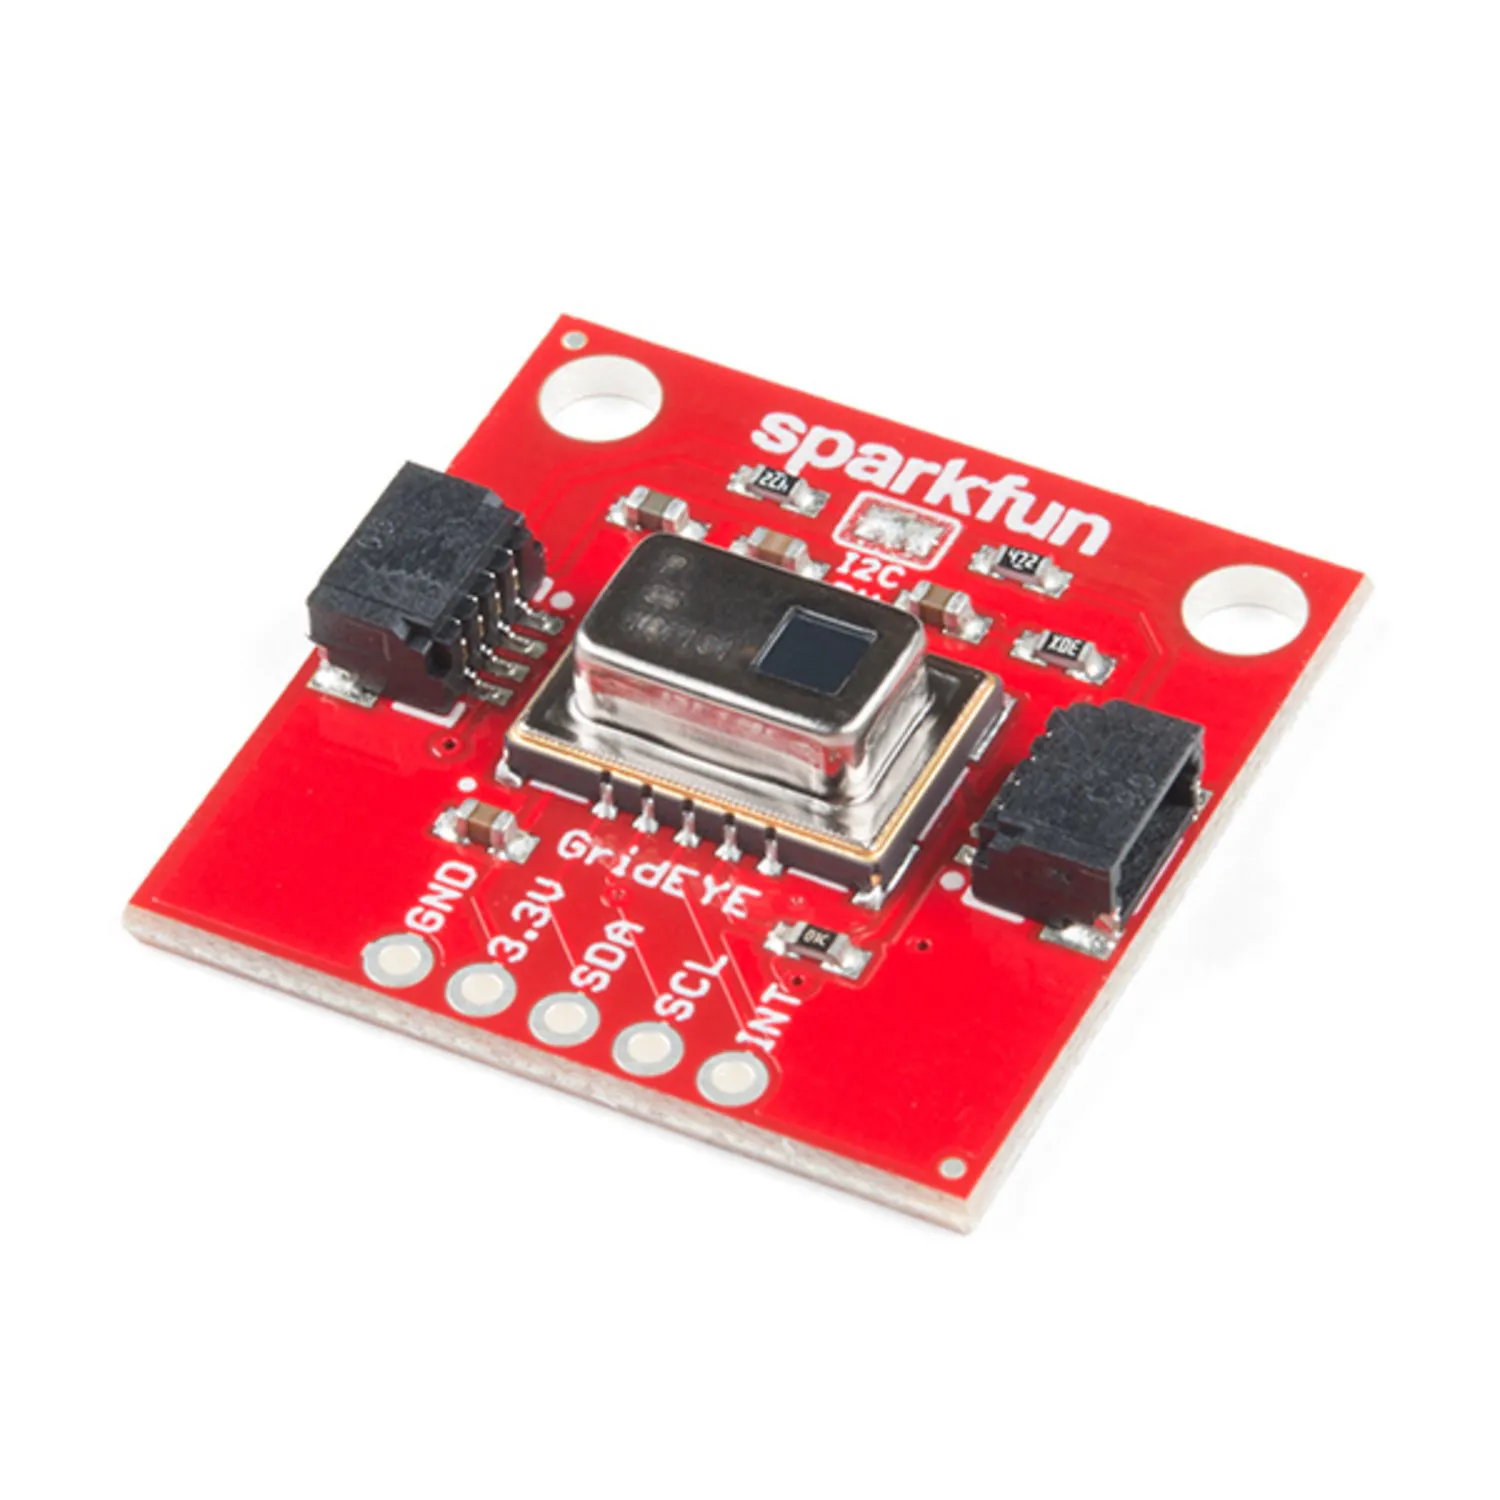 Photo of SparkFun Grid-EYE Infrared Array Breakout - AMG8833 (Qwiic)